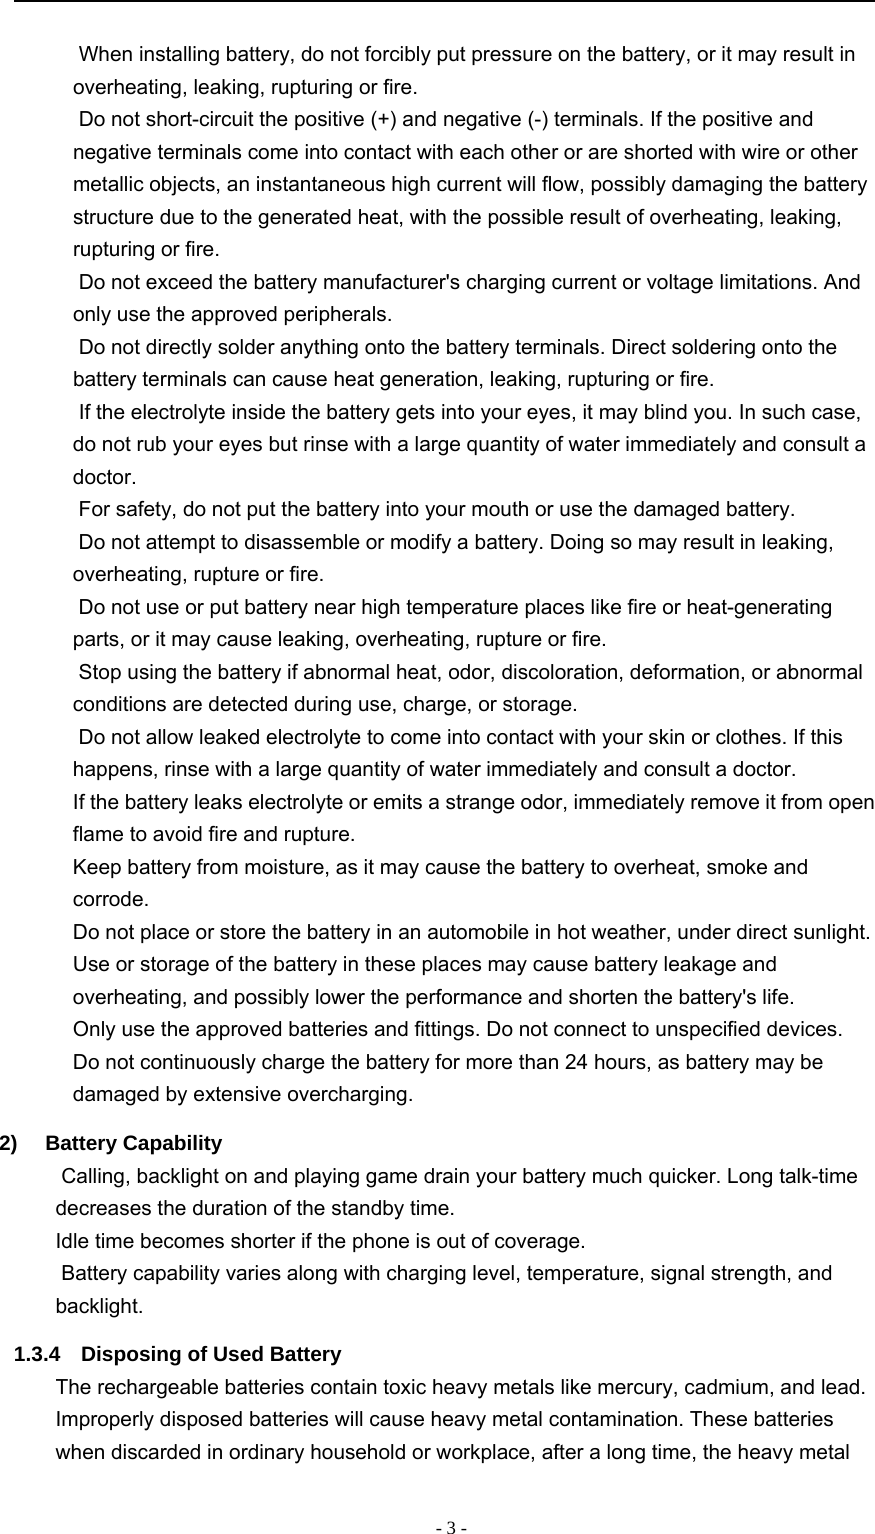 -3-When installing battery, do not forcibly put pressure on the battery, or it may result inoverheating, leaking, rupturing or fire.Do not short-circuit the positive (+) and negative (-) terminals. If the positive andnegative terminals come into contact with each other or are shorted with wire or othermetallic objects, an instantaneous high current will flow, possibly damaging the batterystructure due to the generated heat, with the possible result of overheating, leaking,rupturing or fire.Do not exceed the battery manufacturer&apos;s charging current or voltage limitations. Andonly use the approved peripherals.Do not directly solder anything onto the battery terminals. Direct soldering onto thebattery terminals can cause heat generation, leaking, rupturing or fire.If the electrolyte inside the battery gets into your eyes, it may blind you. In such case,do not rub your eyes but rinse with a large quantity of water immediately and consult adoctor.For safety, do not put the battery into your mouth or use the damaged battery.Do not attempt to disassemble or modify a battery. Doing so may result in leaking,overheating, rupture or fire.Do not use or put battery near high temperature places like fire or heat-generatingparts, or it may cause leaking, overheating, rupture or fire.Stop using the battery if abnormal heat, odor, discoloration, deformation, or abnormalconditions are detected during use, charge, or storage.Do not allow leaked electrolyte to come into contact with your skin or clothes. If thishappens, rinse with a large quantity of water immediately and consult a doctor.If the battery leaks electrolyte or emits a strange odor, immediately remove it from openflame to avoid fire and rupture.Keep battery from moisture, as it may cause the battery to overheat, smoke andcorrode.Do not place or store the battery in an automobile in hot weather, under direct sunlight.Use or storage of the battery in these places may cause battery leakage andoverheating, and possibly lower the performance and shorten the battery&apos;s life.Only use the approved batteries and fittings. Do not connect to unspecified devices.Do not continuously charge the battery for more than 24 hours, as battery may bedamaged by extensive overcharging.2) Battery Capability　Calling, backlight on and playing game drain your battery much quicker. Long talk-timedecreases the duration of the standby time.　Idle time becomes shorter if the phone is out of coverage.　Battery capability varies along with charging level, temperature, signal strength, andbacklight.1.3.4 Disposing of Used BatteryThe rechargeable batteries contain toxic heavy metals like mercury, cadmium, and lead.Improperly disposed batteries will cause heavy metal contamination. These batterieswhen discarded in ordinary household or workplace, after a long time, the heavy metal